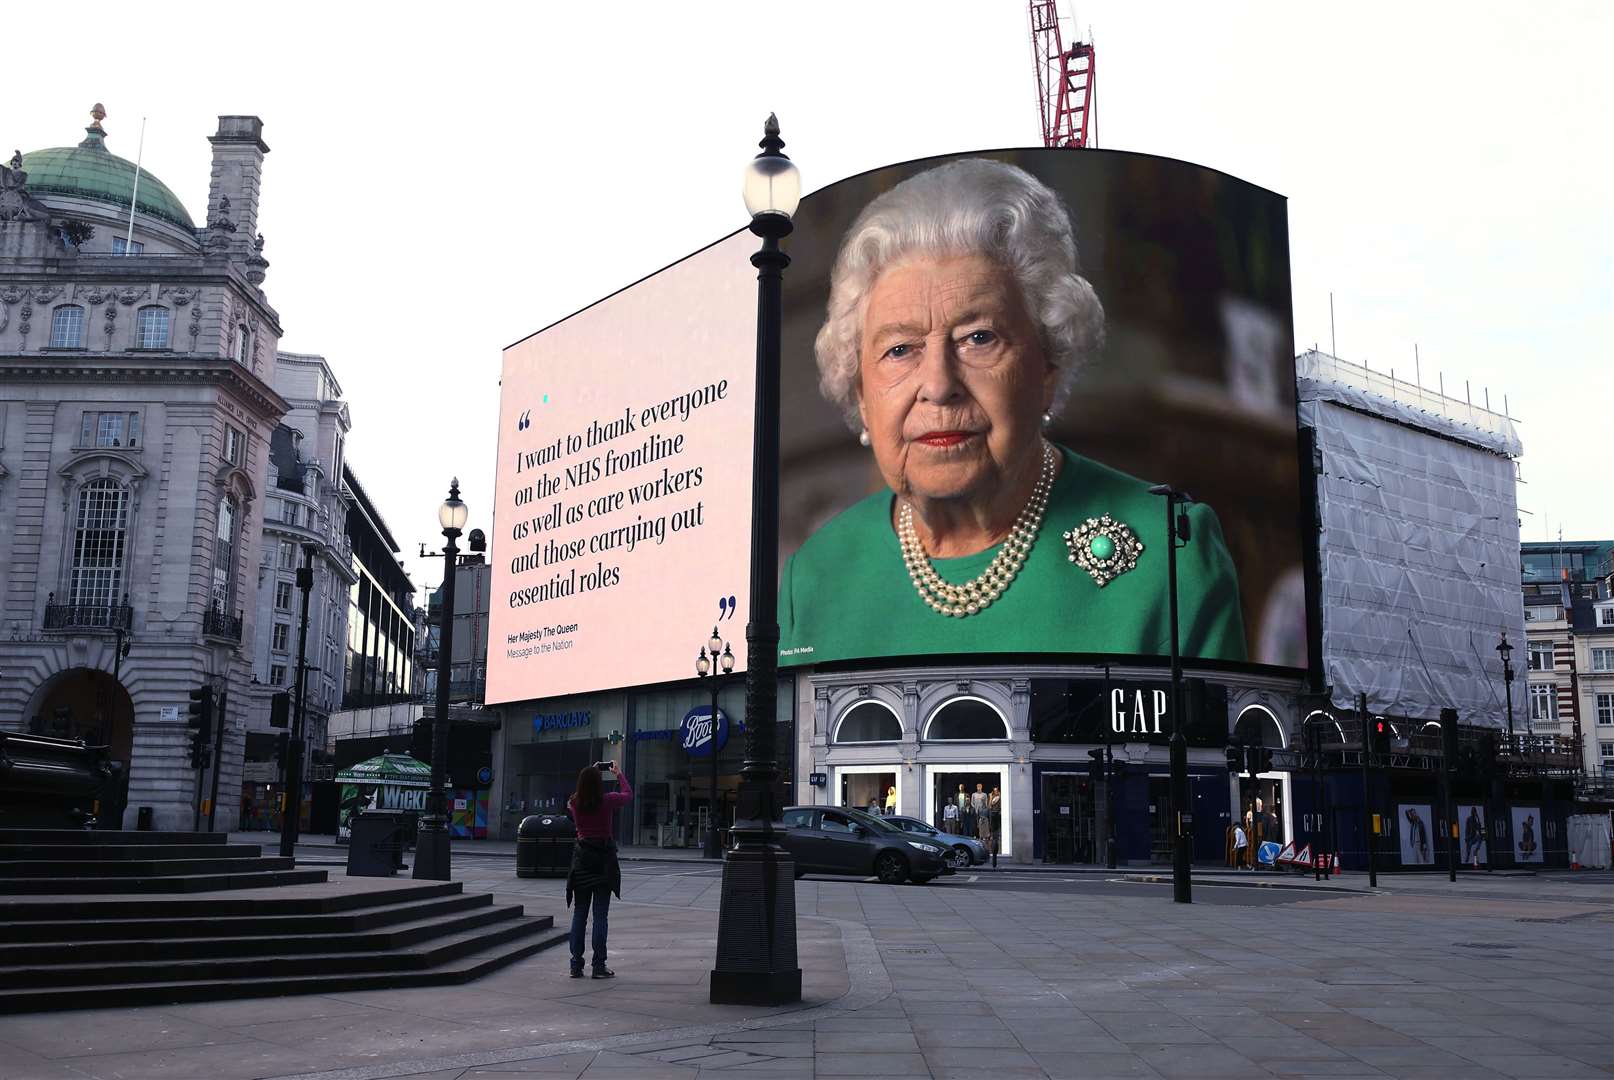 An image of the Queen and quotes from her broadcast in April on the coronavirus pandemic are displayed on lights in London’s Piccadilly Circus (Yui Mok/PA)